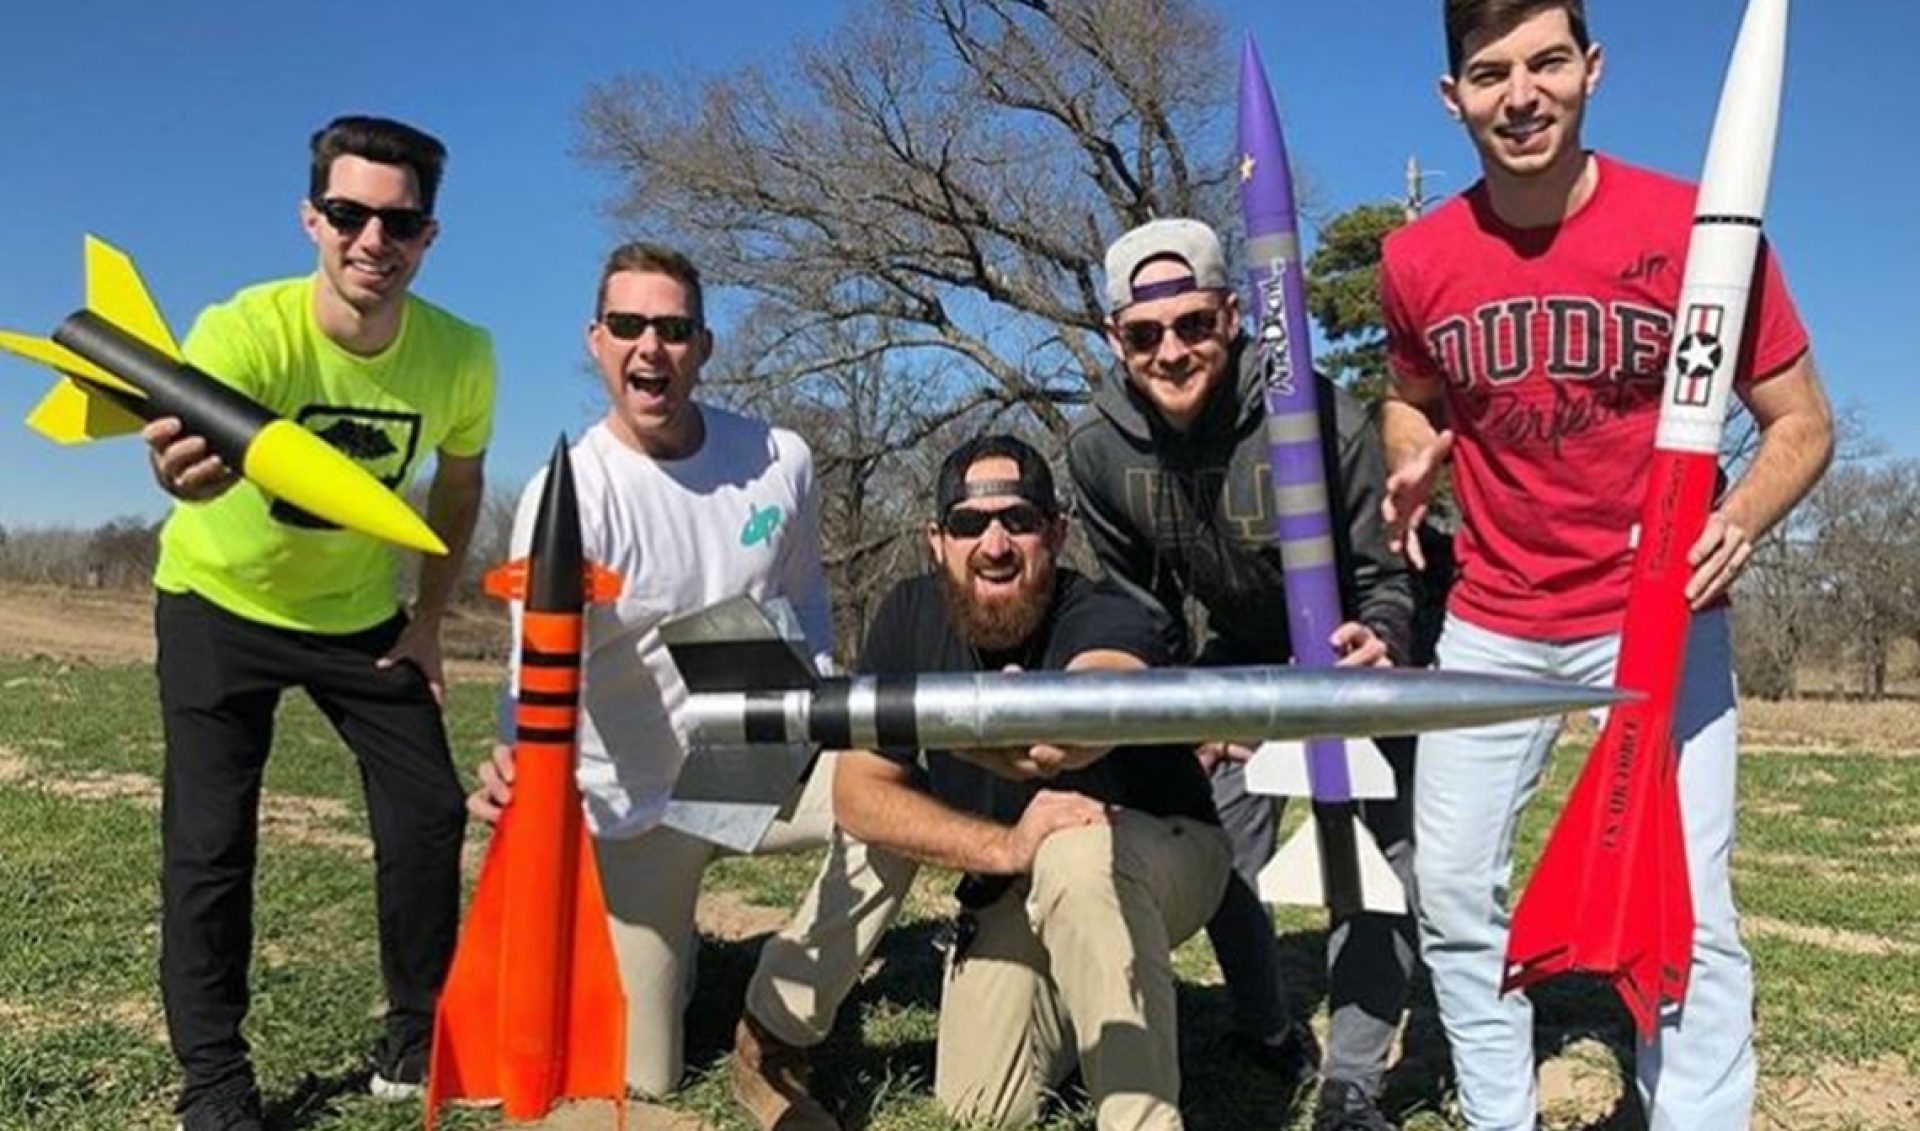 Whistle Sports Inks New Deal With Dude Perfect To Develop Long-Form Shows (Exclusive)